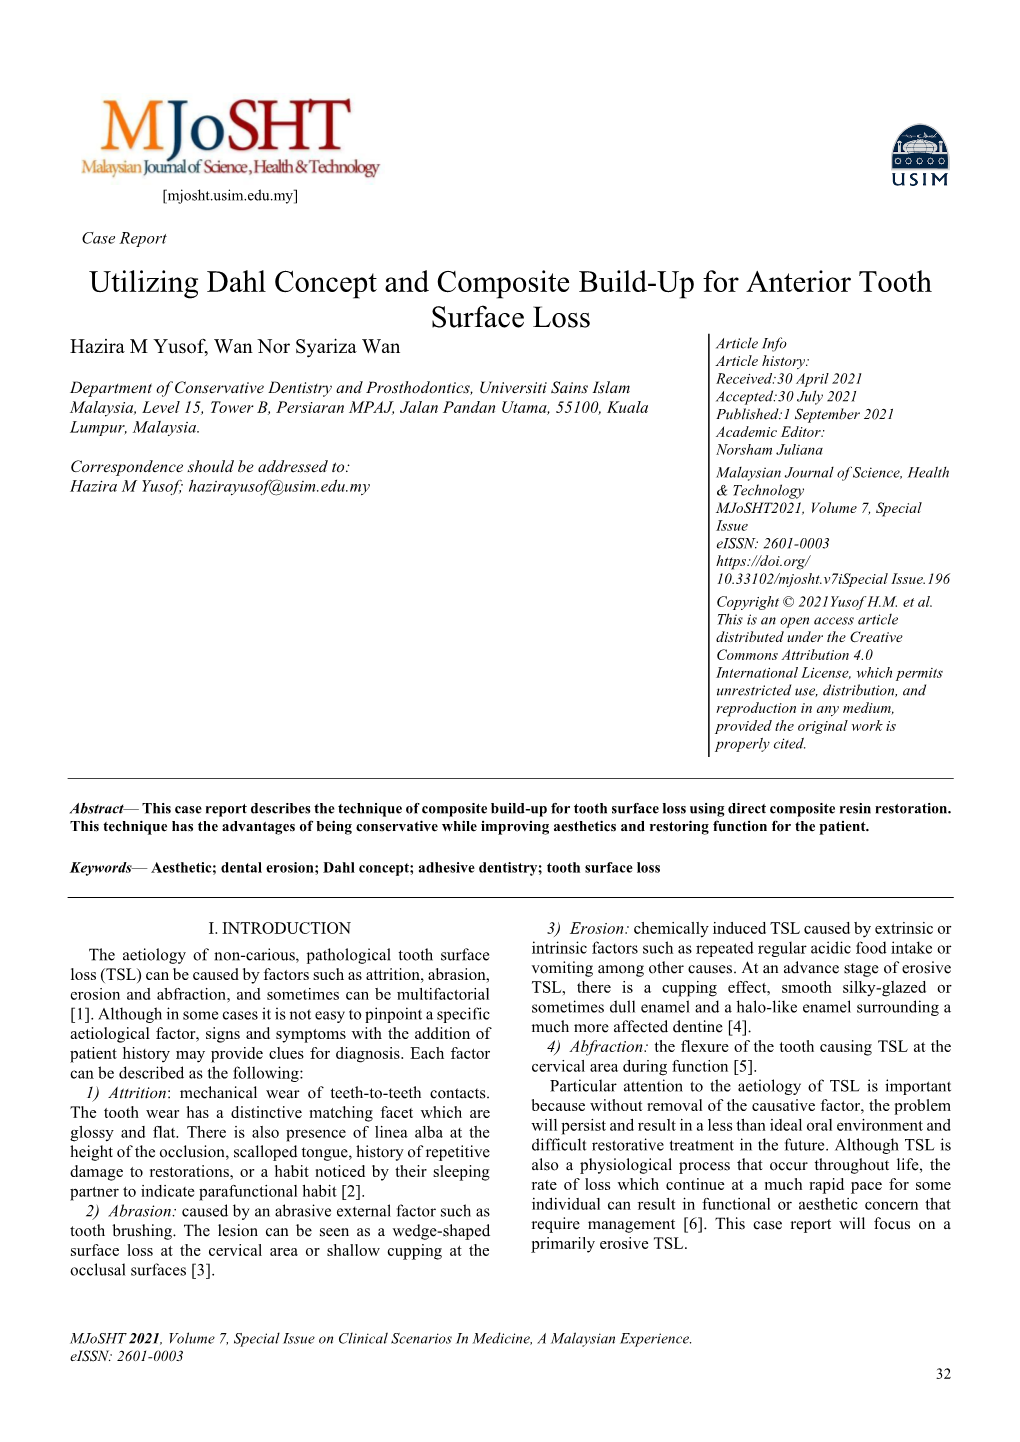 Utilizing Dahl Concept and Composite Build-Up for Anterior Tooth Surface